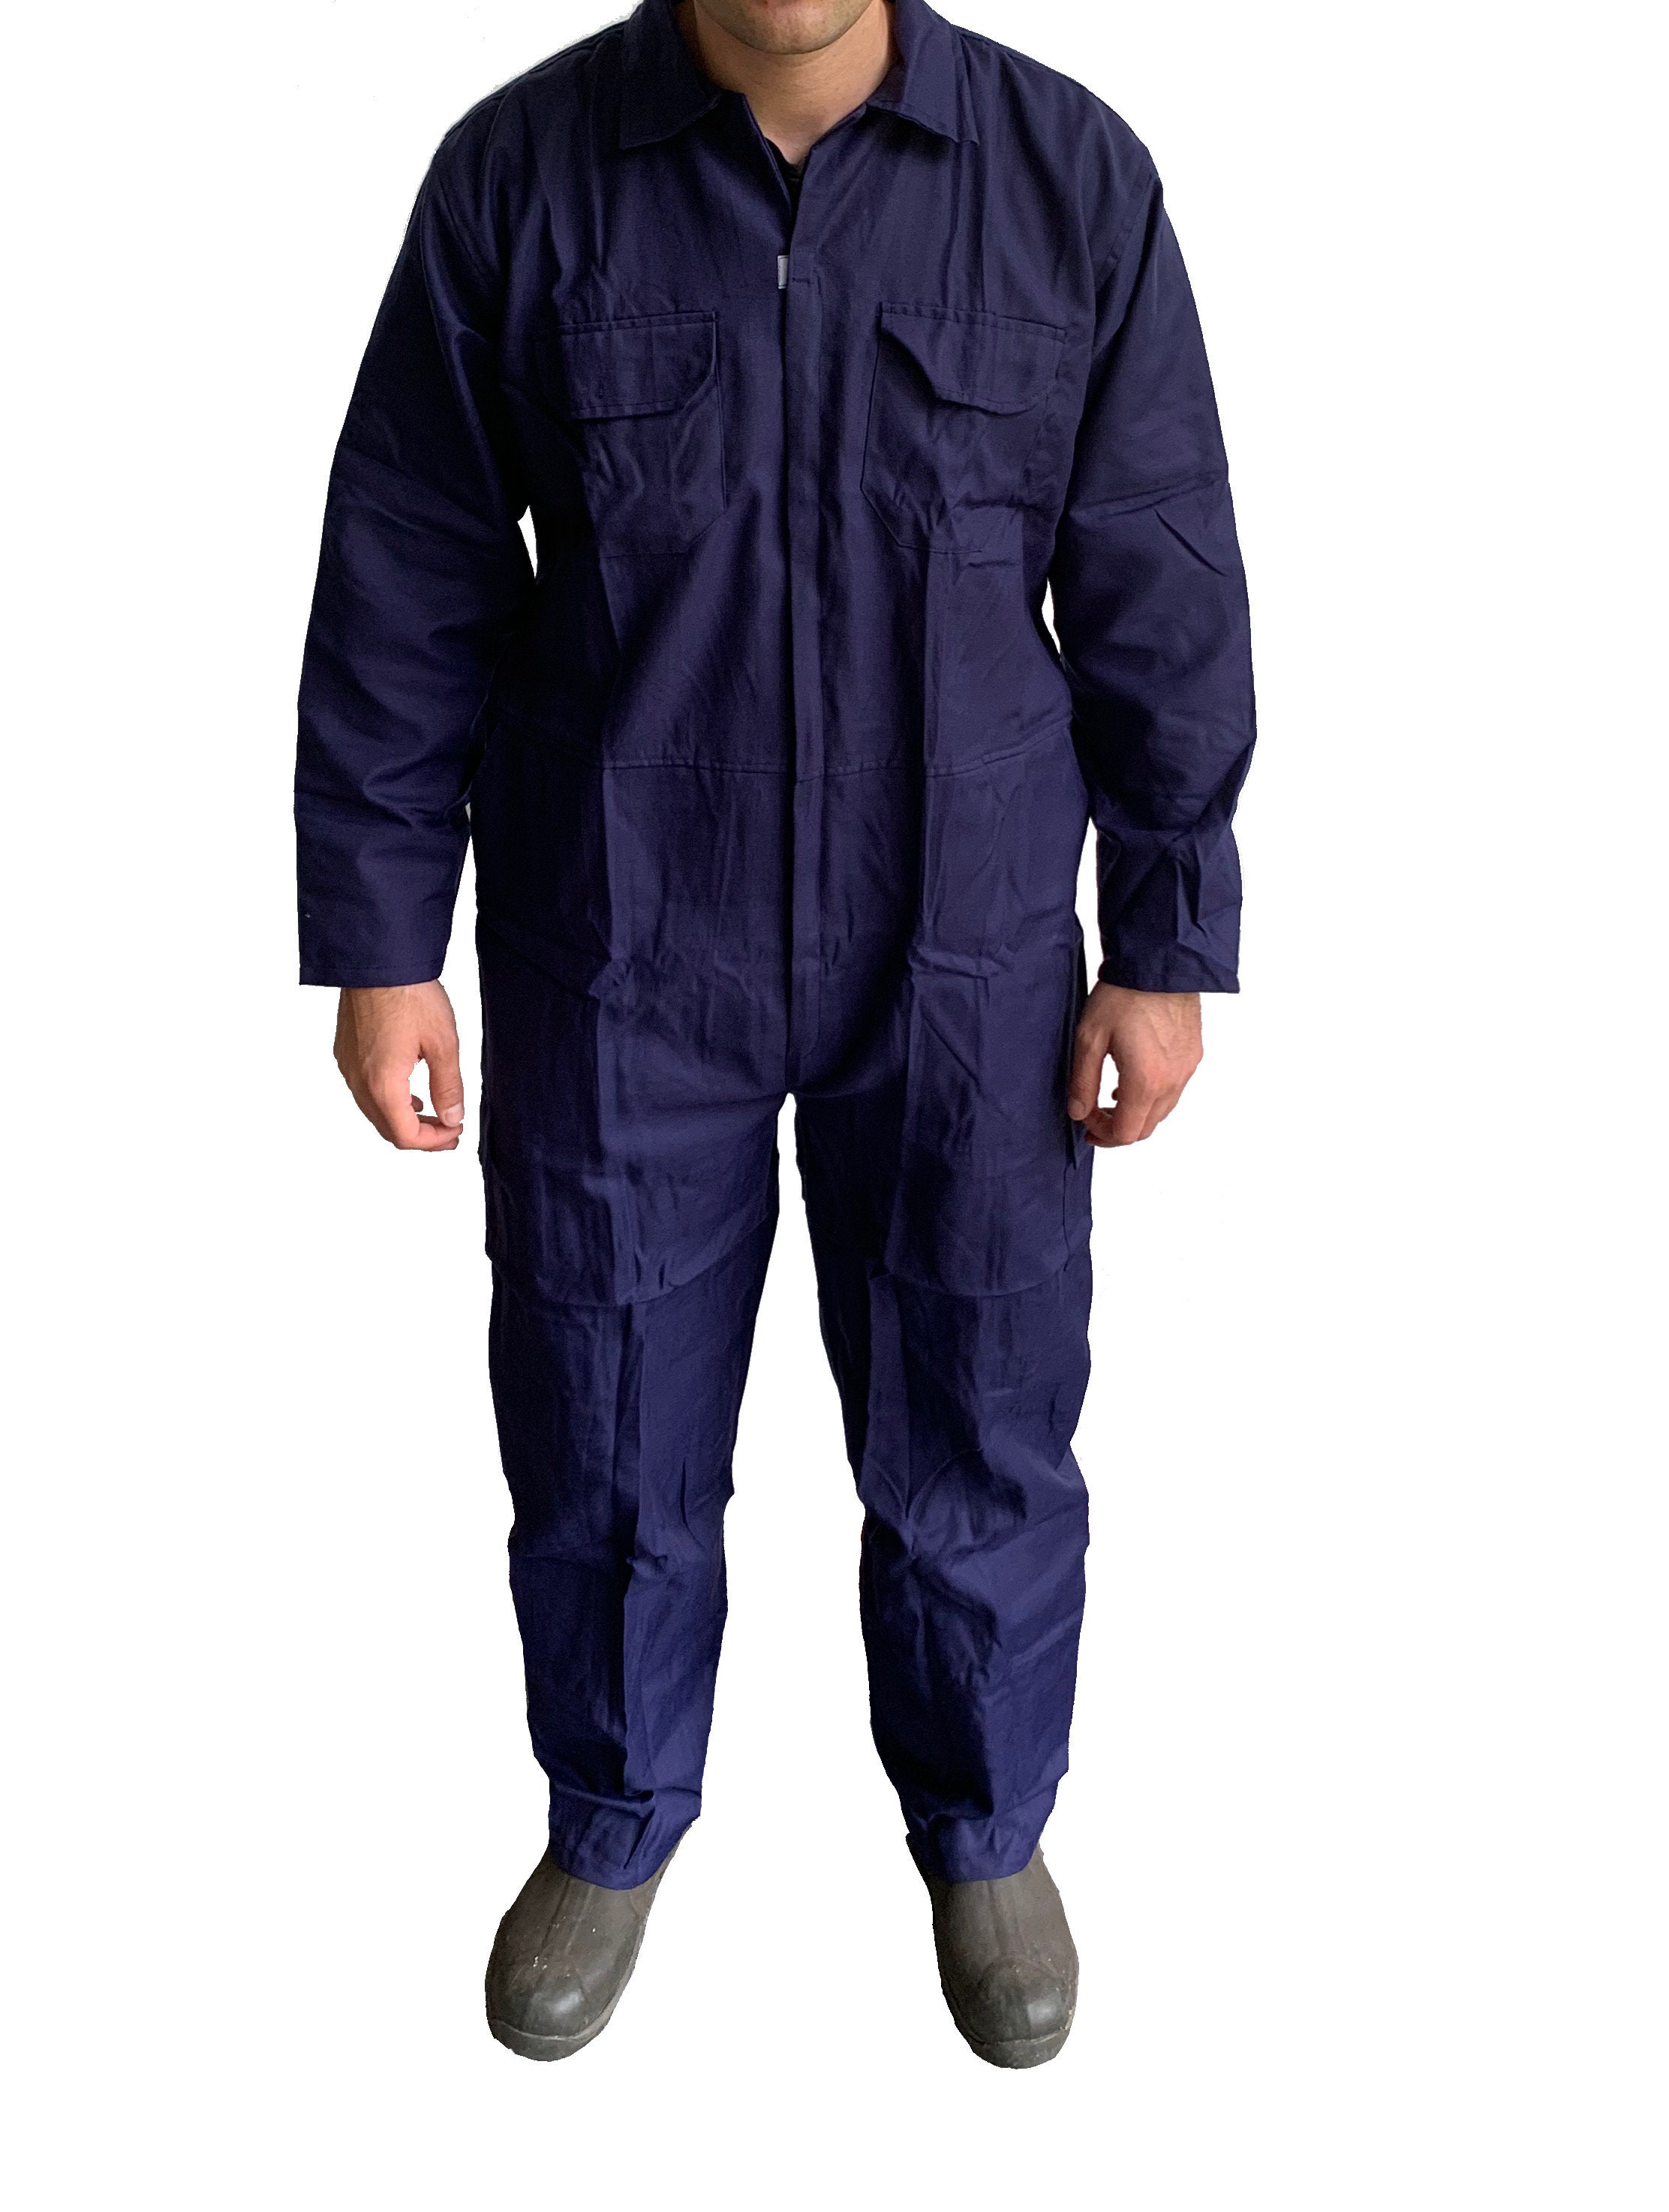 Mens Navy Coveralls Boilersuit Overalls Warehouse Garages - Etsy